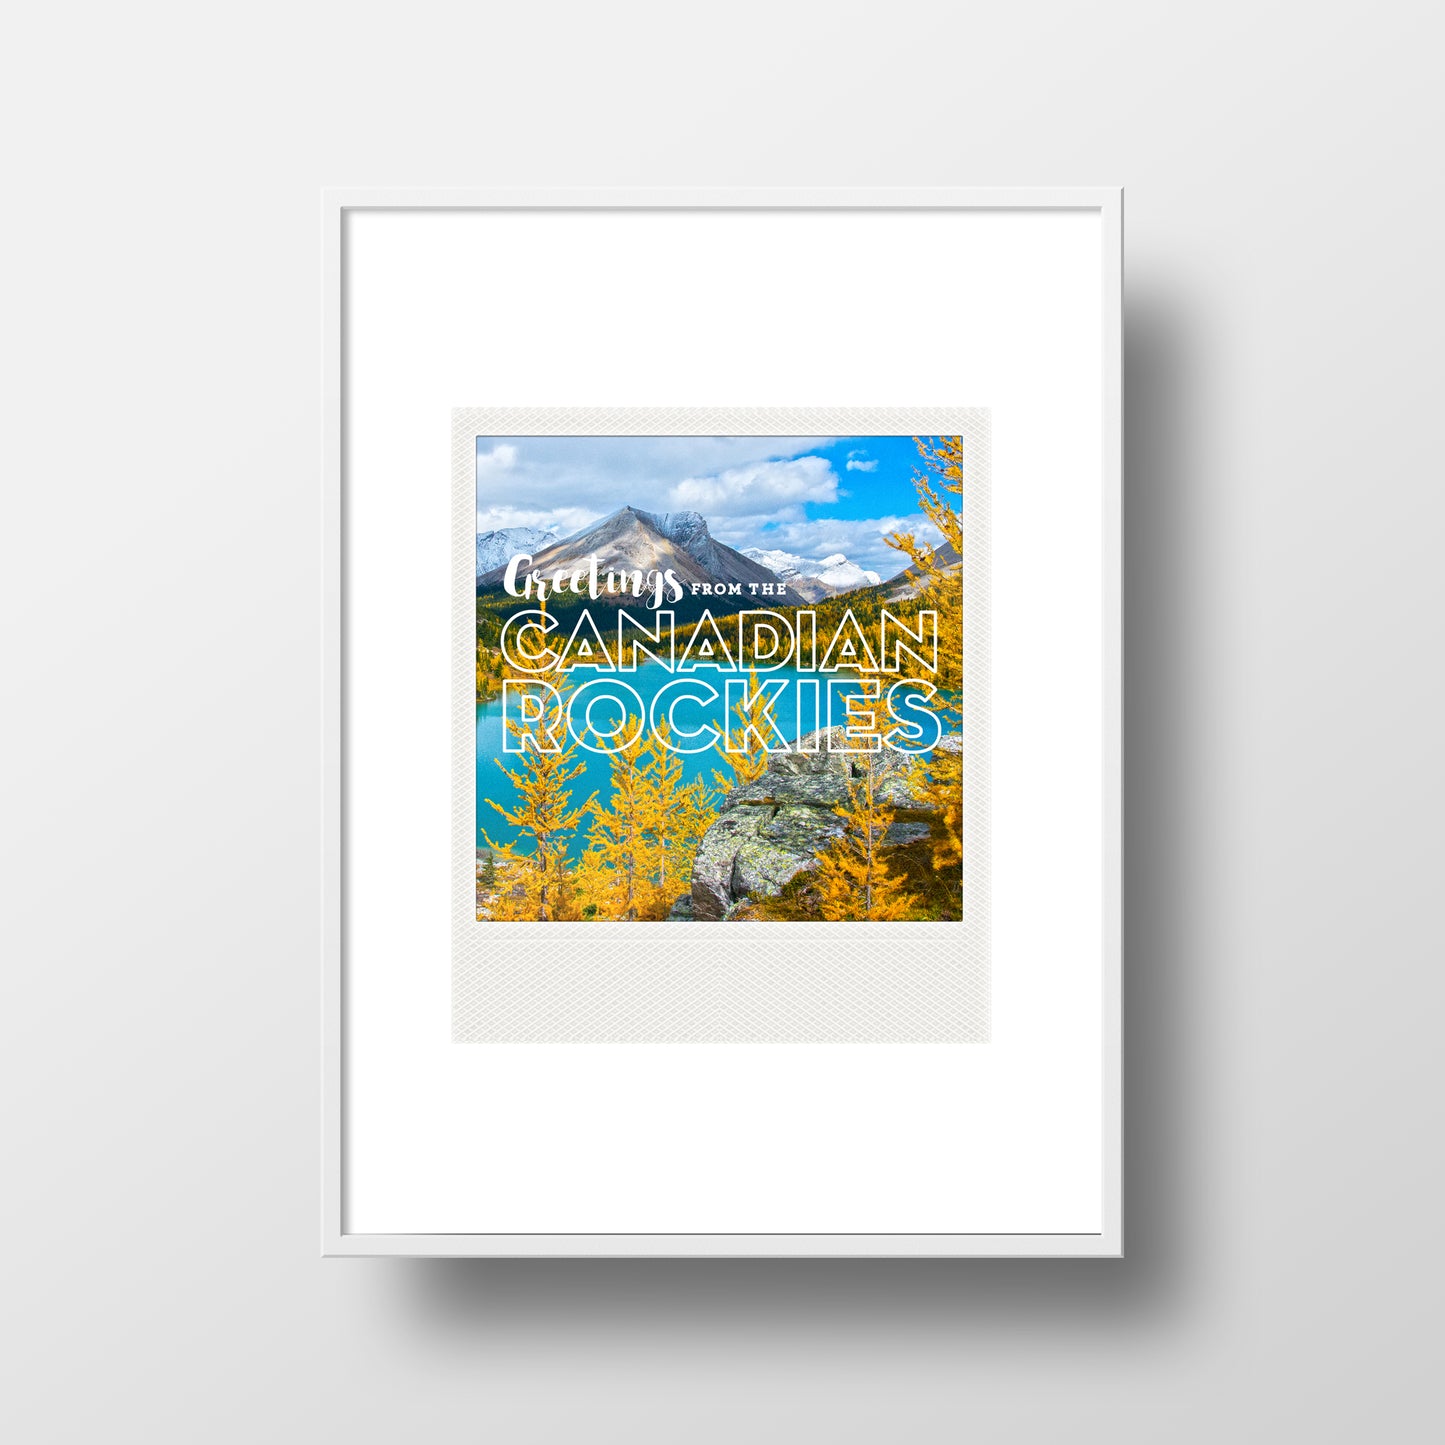 Metallic Polaroid Magnet <br> Greetings from the Canadian Rockies